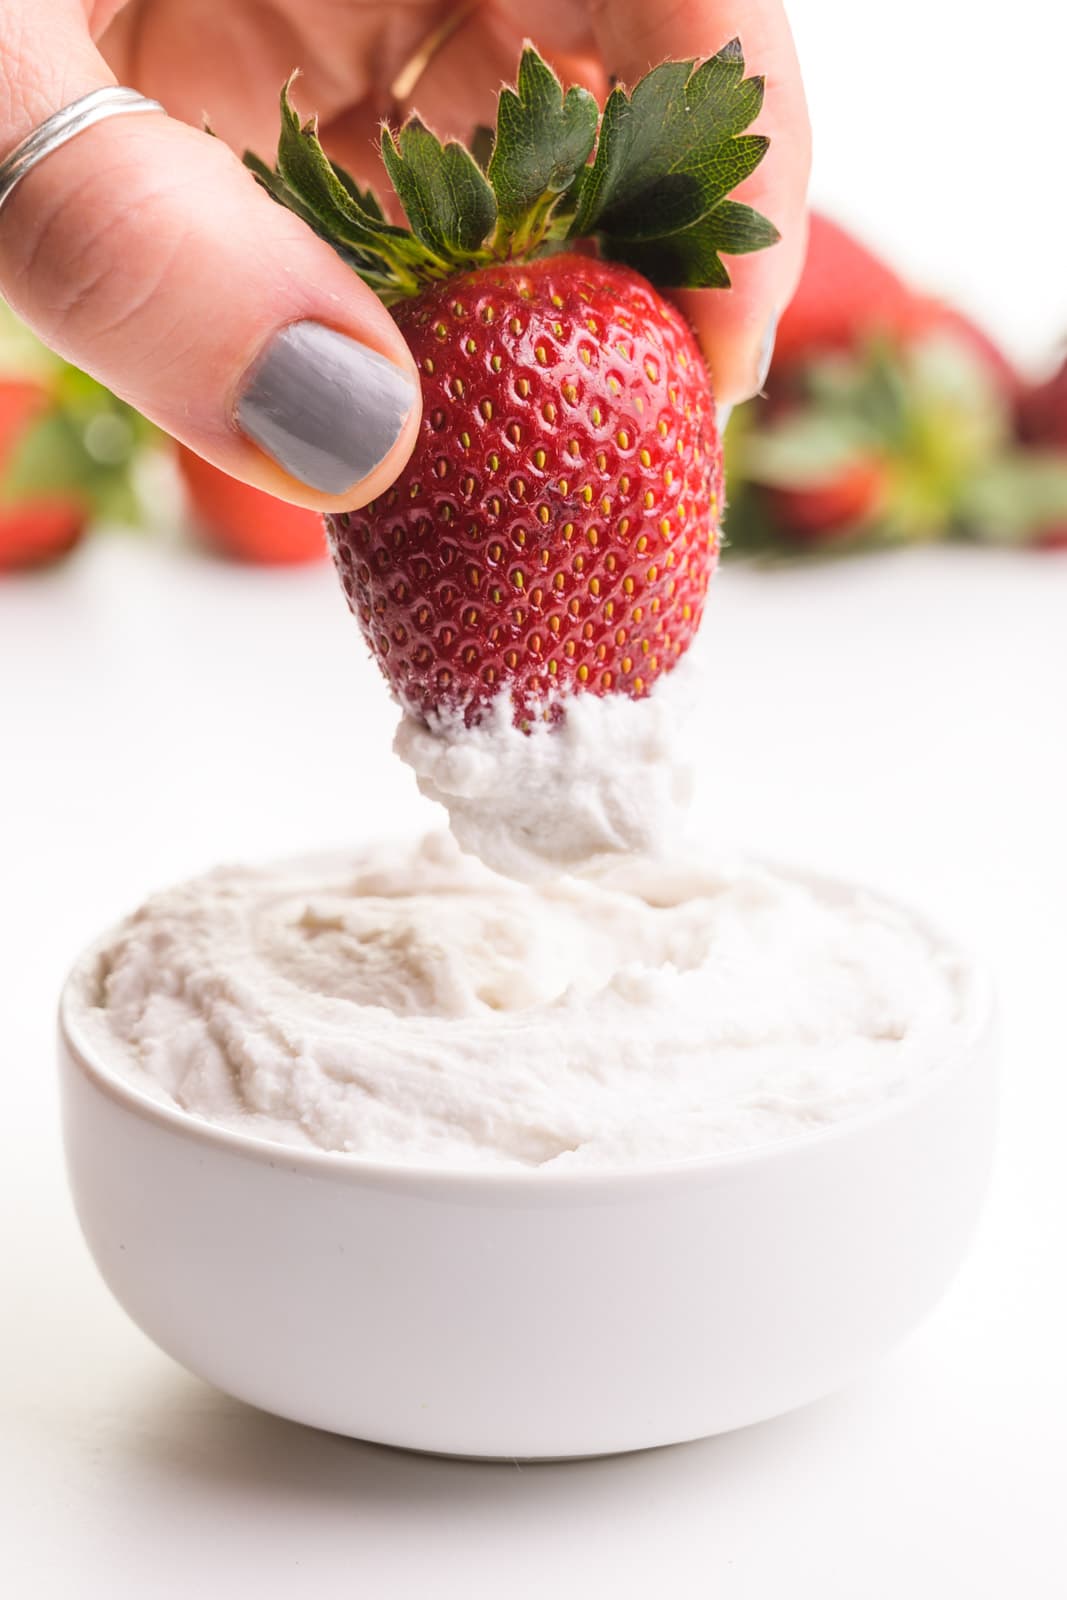 A hand holds a strawberry and is dipping it in a bowl of whipped coconut milk. There are more fresh strawberries in the background.